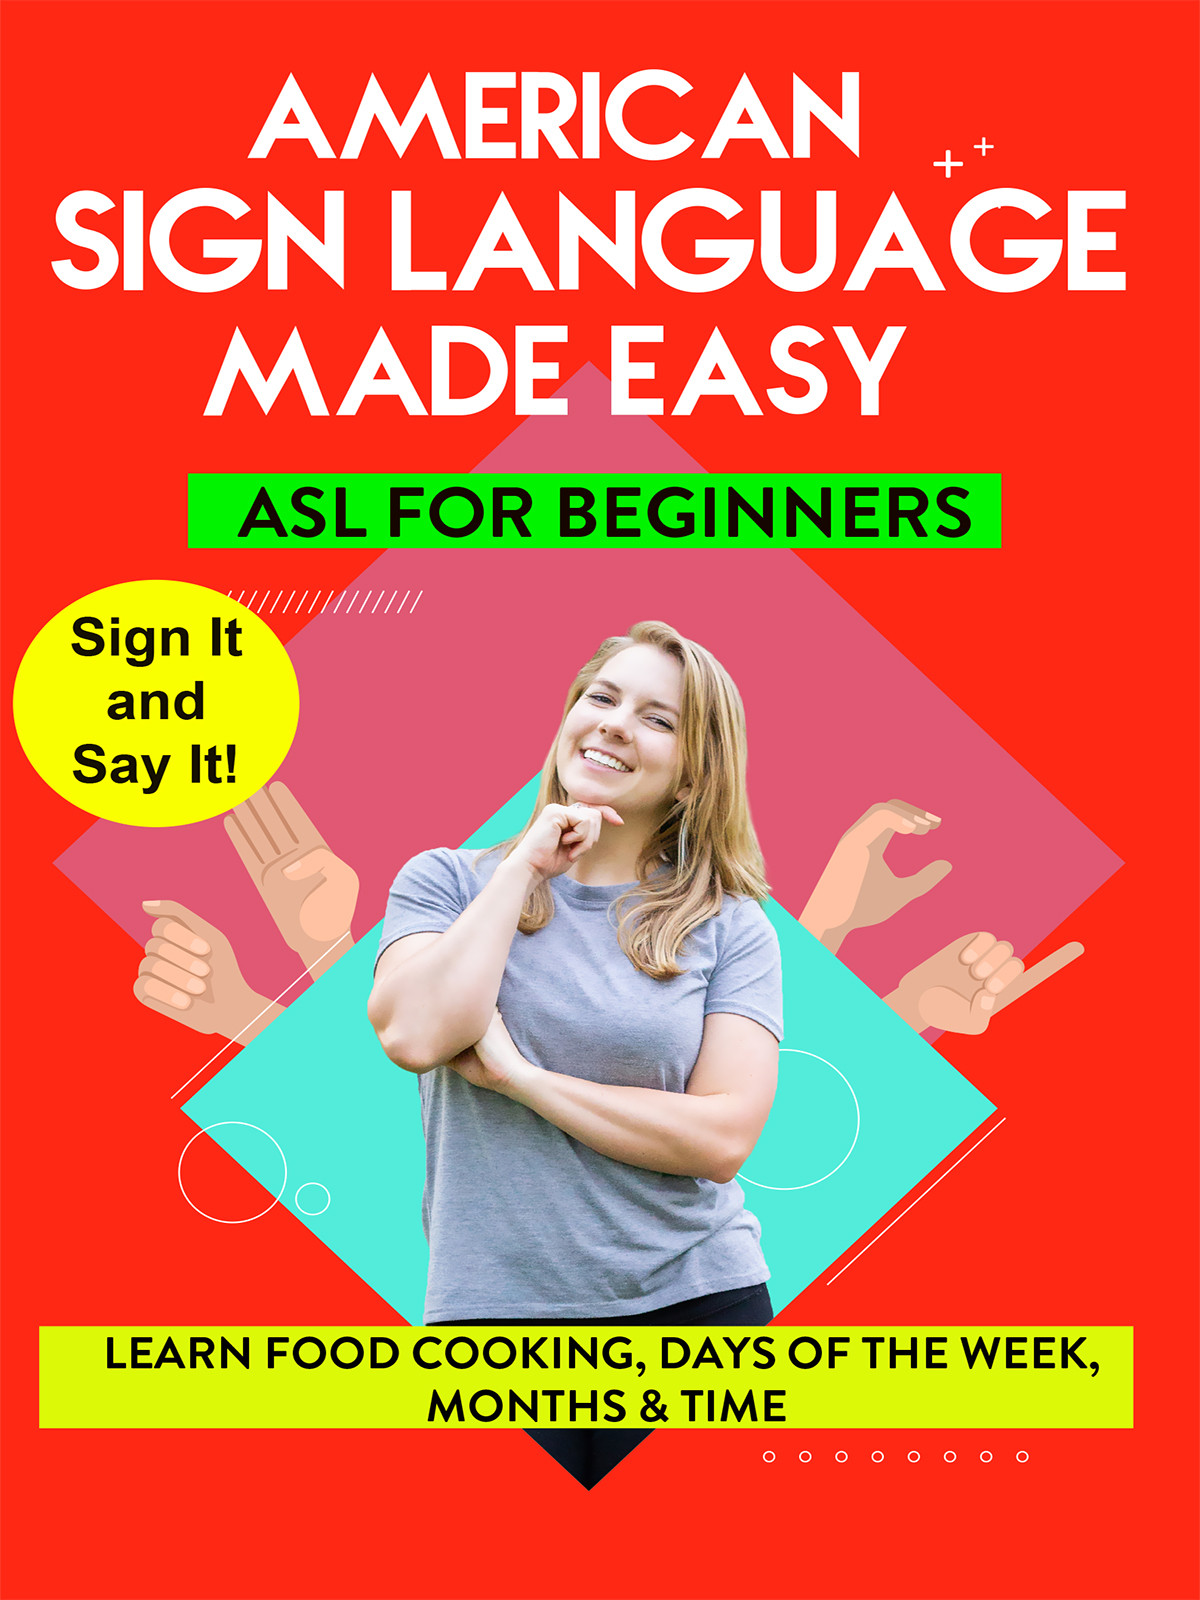 K9804 - ASL - Learn Food, Cooking, Days of the Week, Months & Time